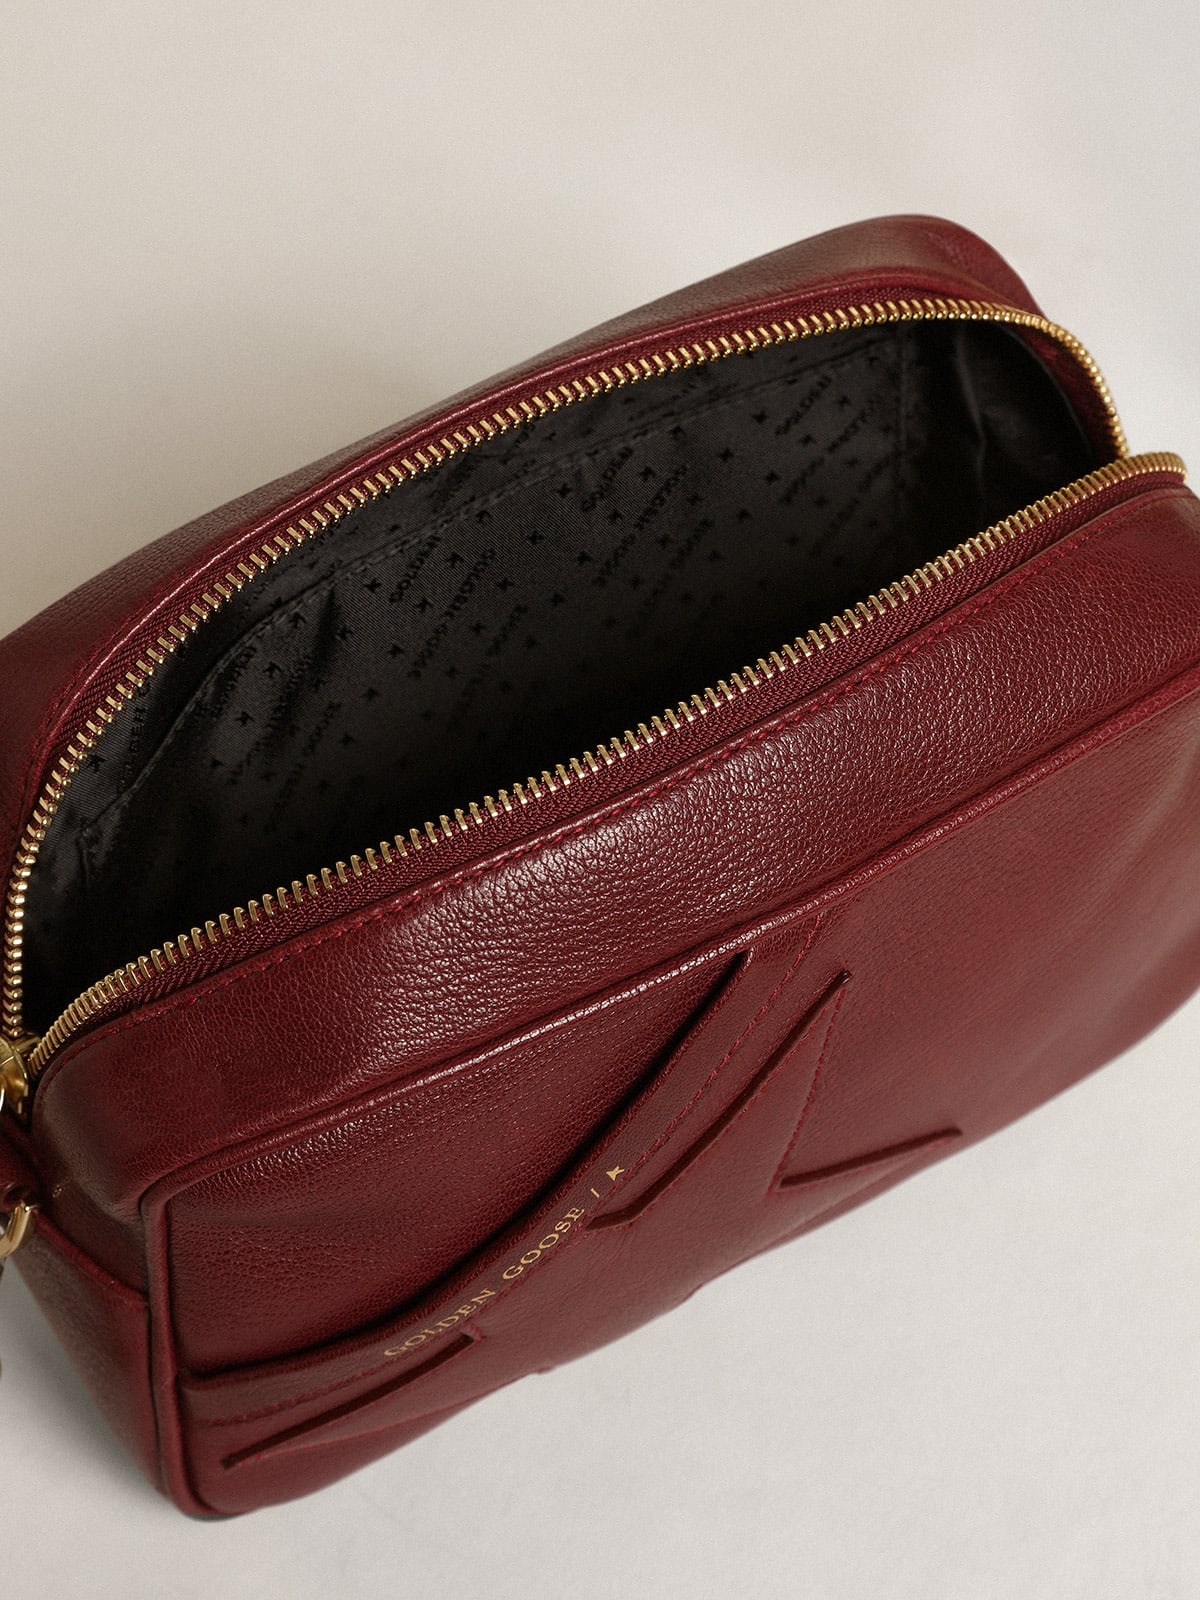 Star Bag in burgundy leather with tone-on-tone star - 4